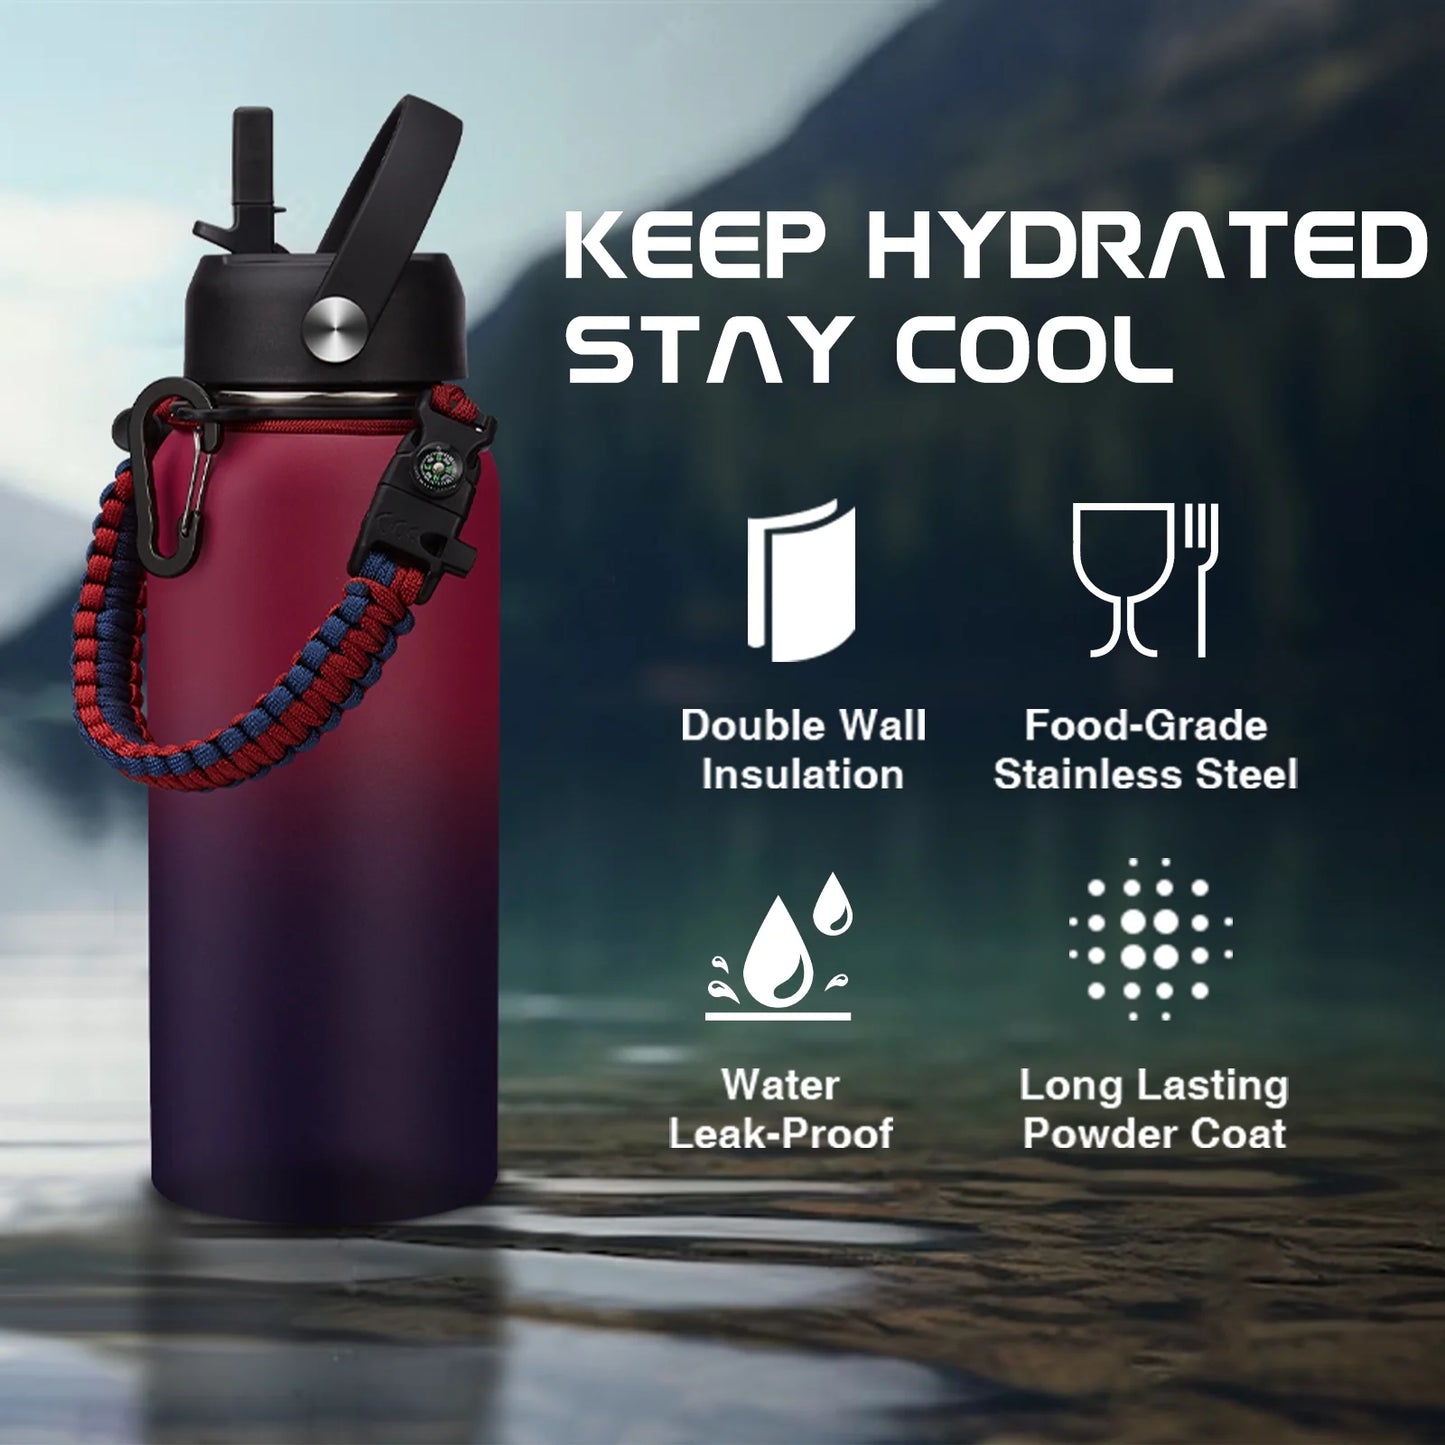 32 Oz Insulated Water Bottle with Straw - Spout Lids, Paracord Handle, Shoulder Carrier Bag, Stainless Steel Sport Water Bottle Metal Flask